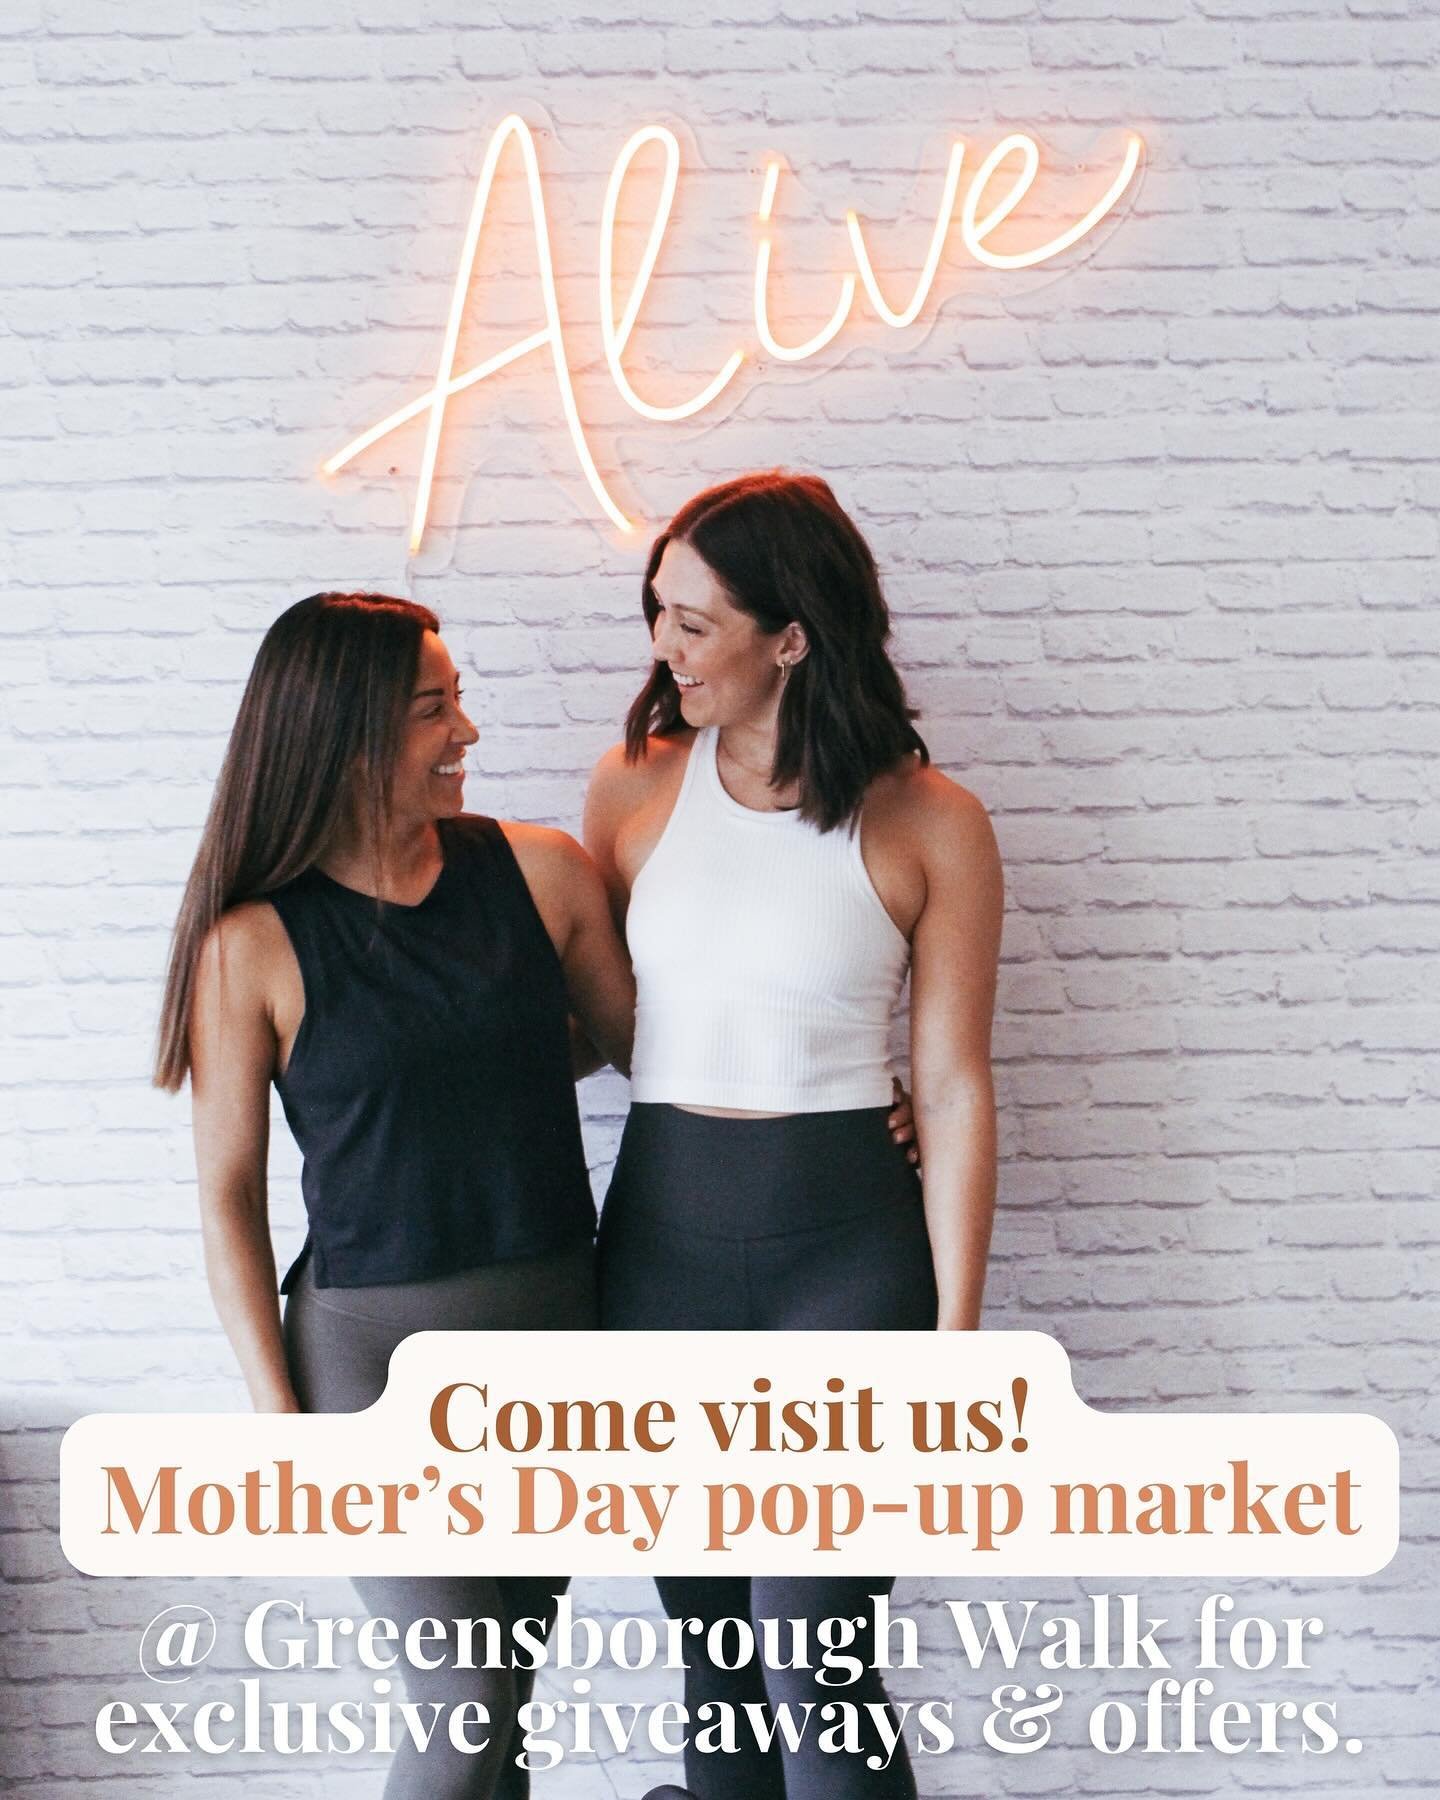 &mdash; Come visit us! &mdash; Alive will have a market stall at Greensborough&rsquo;s Mother&rsquo;s Day pop-up market on Saturday May 11th from 11-3pm where EXCLUSIVE giveaways and offers will be available. 

Make sure to come down to claim our on-